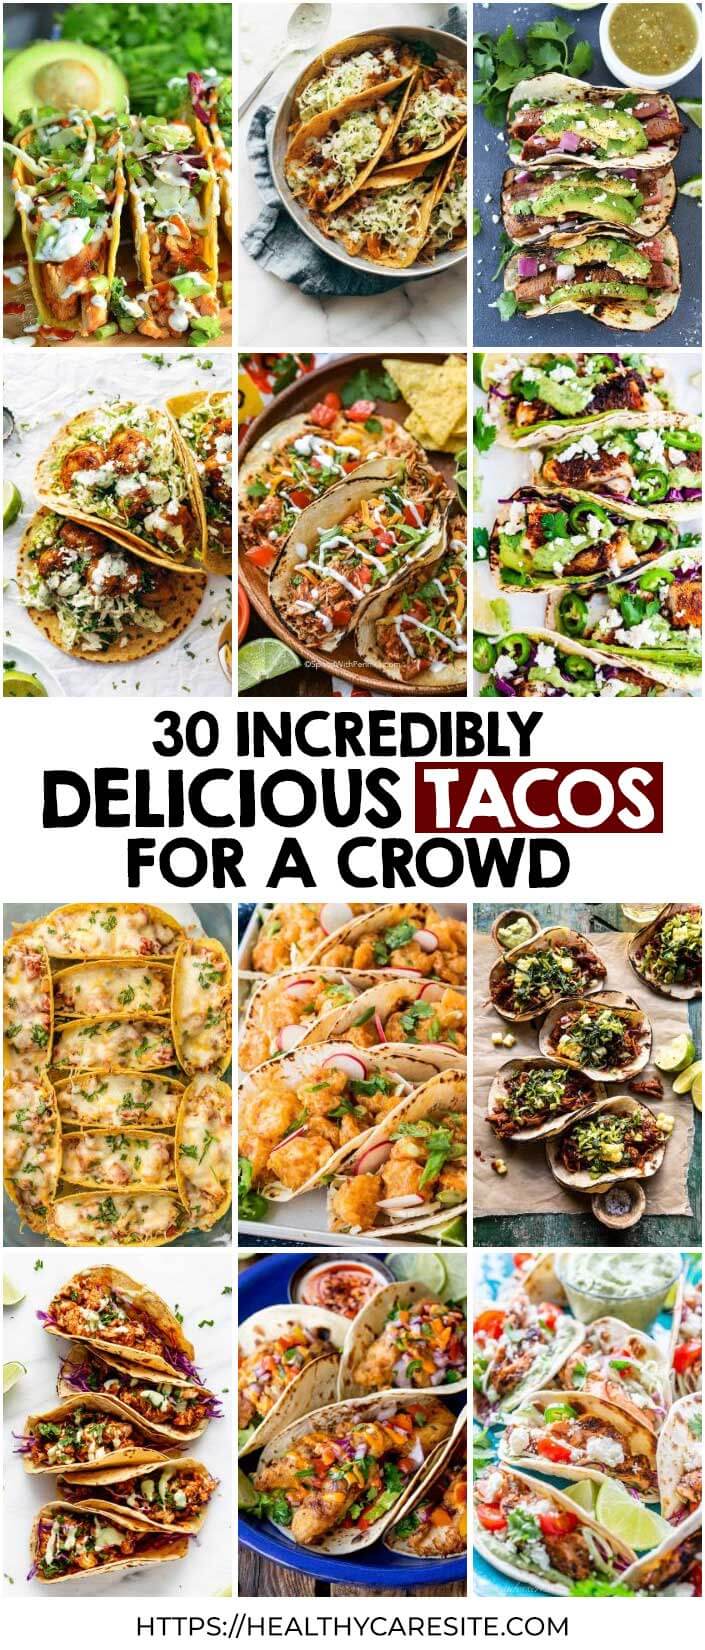 30 Incredibly Delicious Tacos For A Crowd